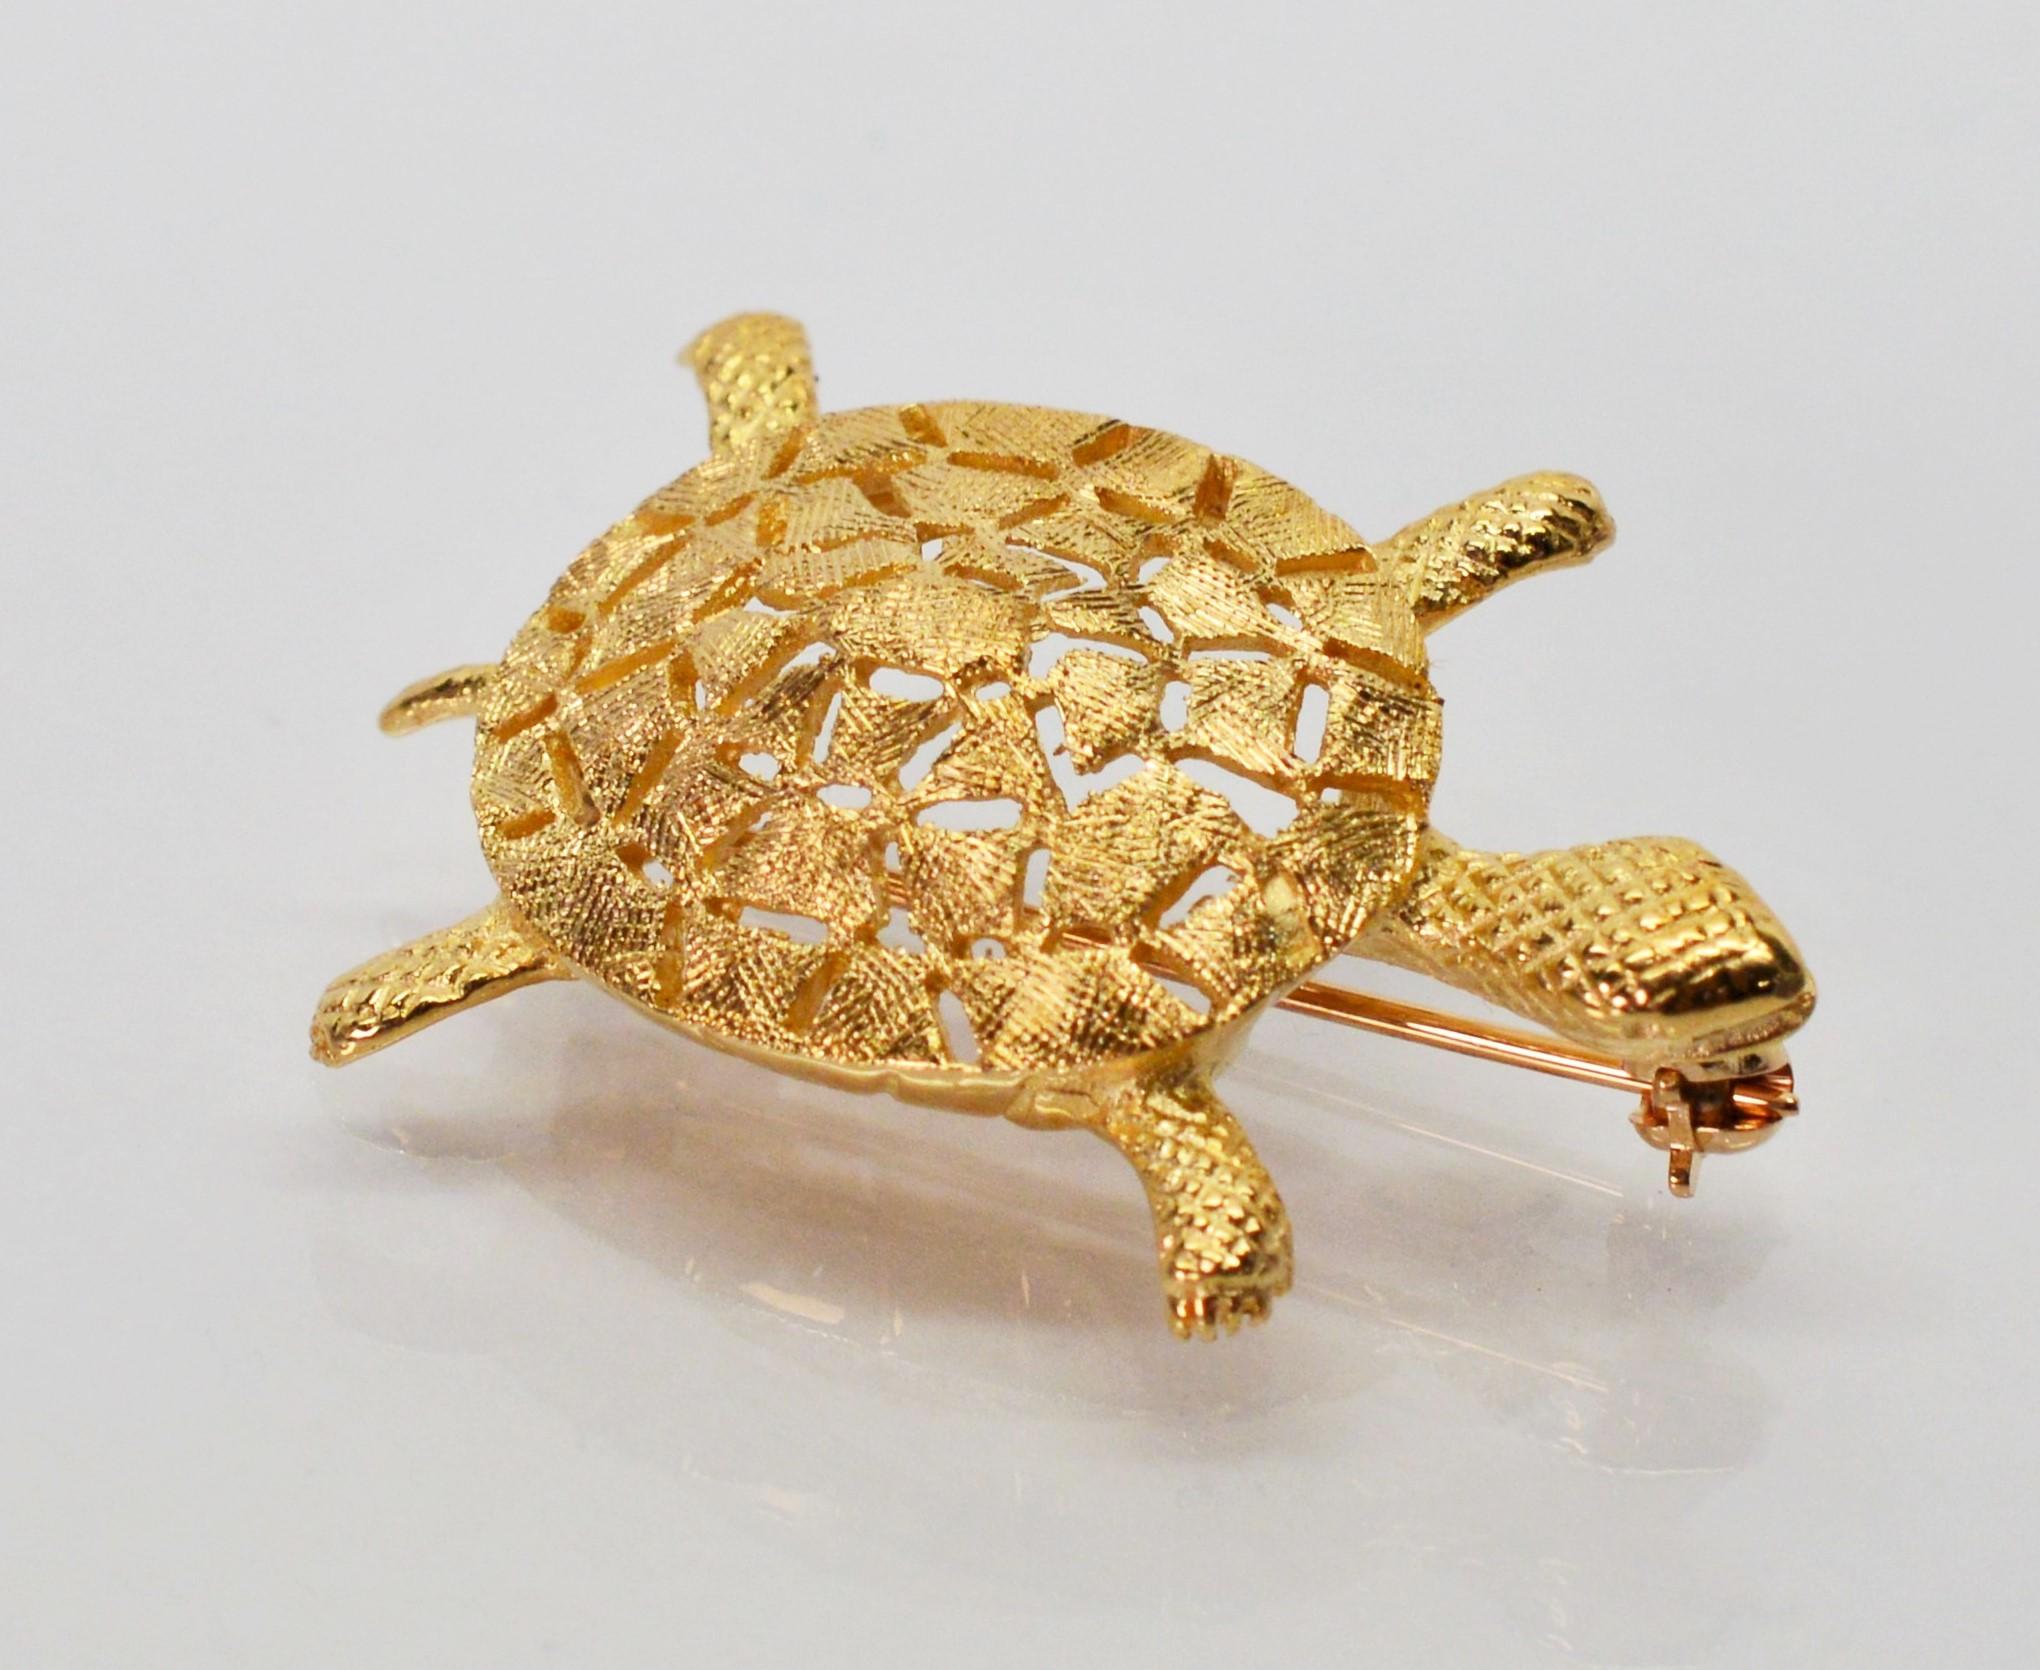 Accompany your outfit with this adorable fourteen carat yellow gold turtle pin brooch. A positive omen of good fortune, the turtle signifies longevity and great patience. Textured gold finishes distinguish the head, feet and shell of this little